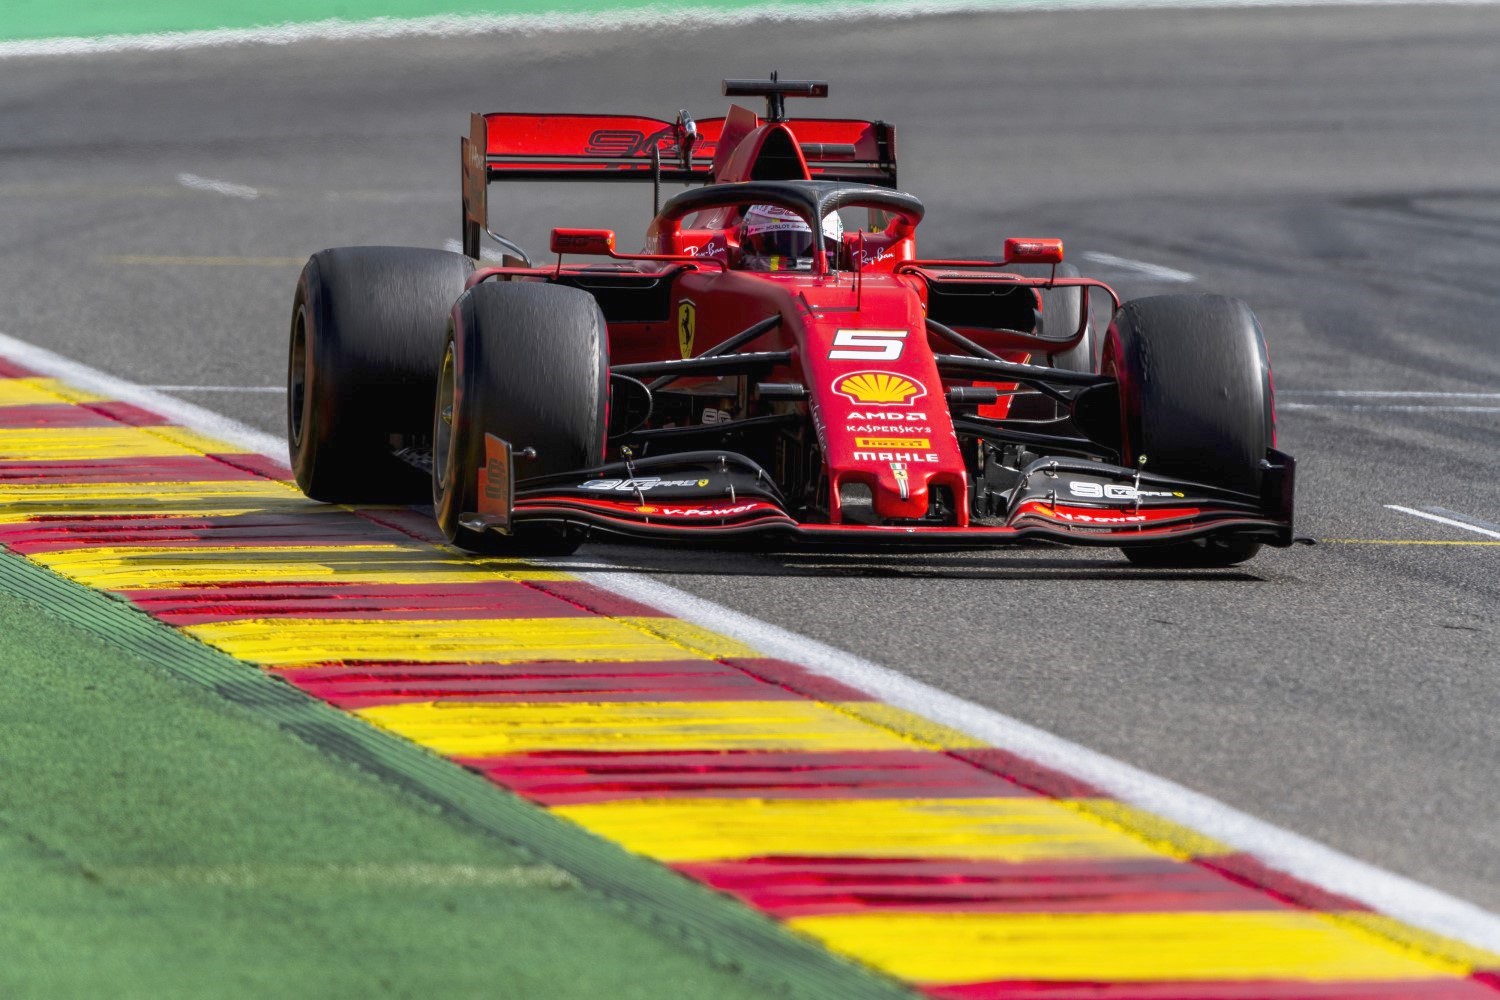 Leclerc won only because Vettel was able to hold up Hamilton a few precious seconds. The superior Mercedes was eating Ferrari's lunch in the corners